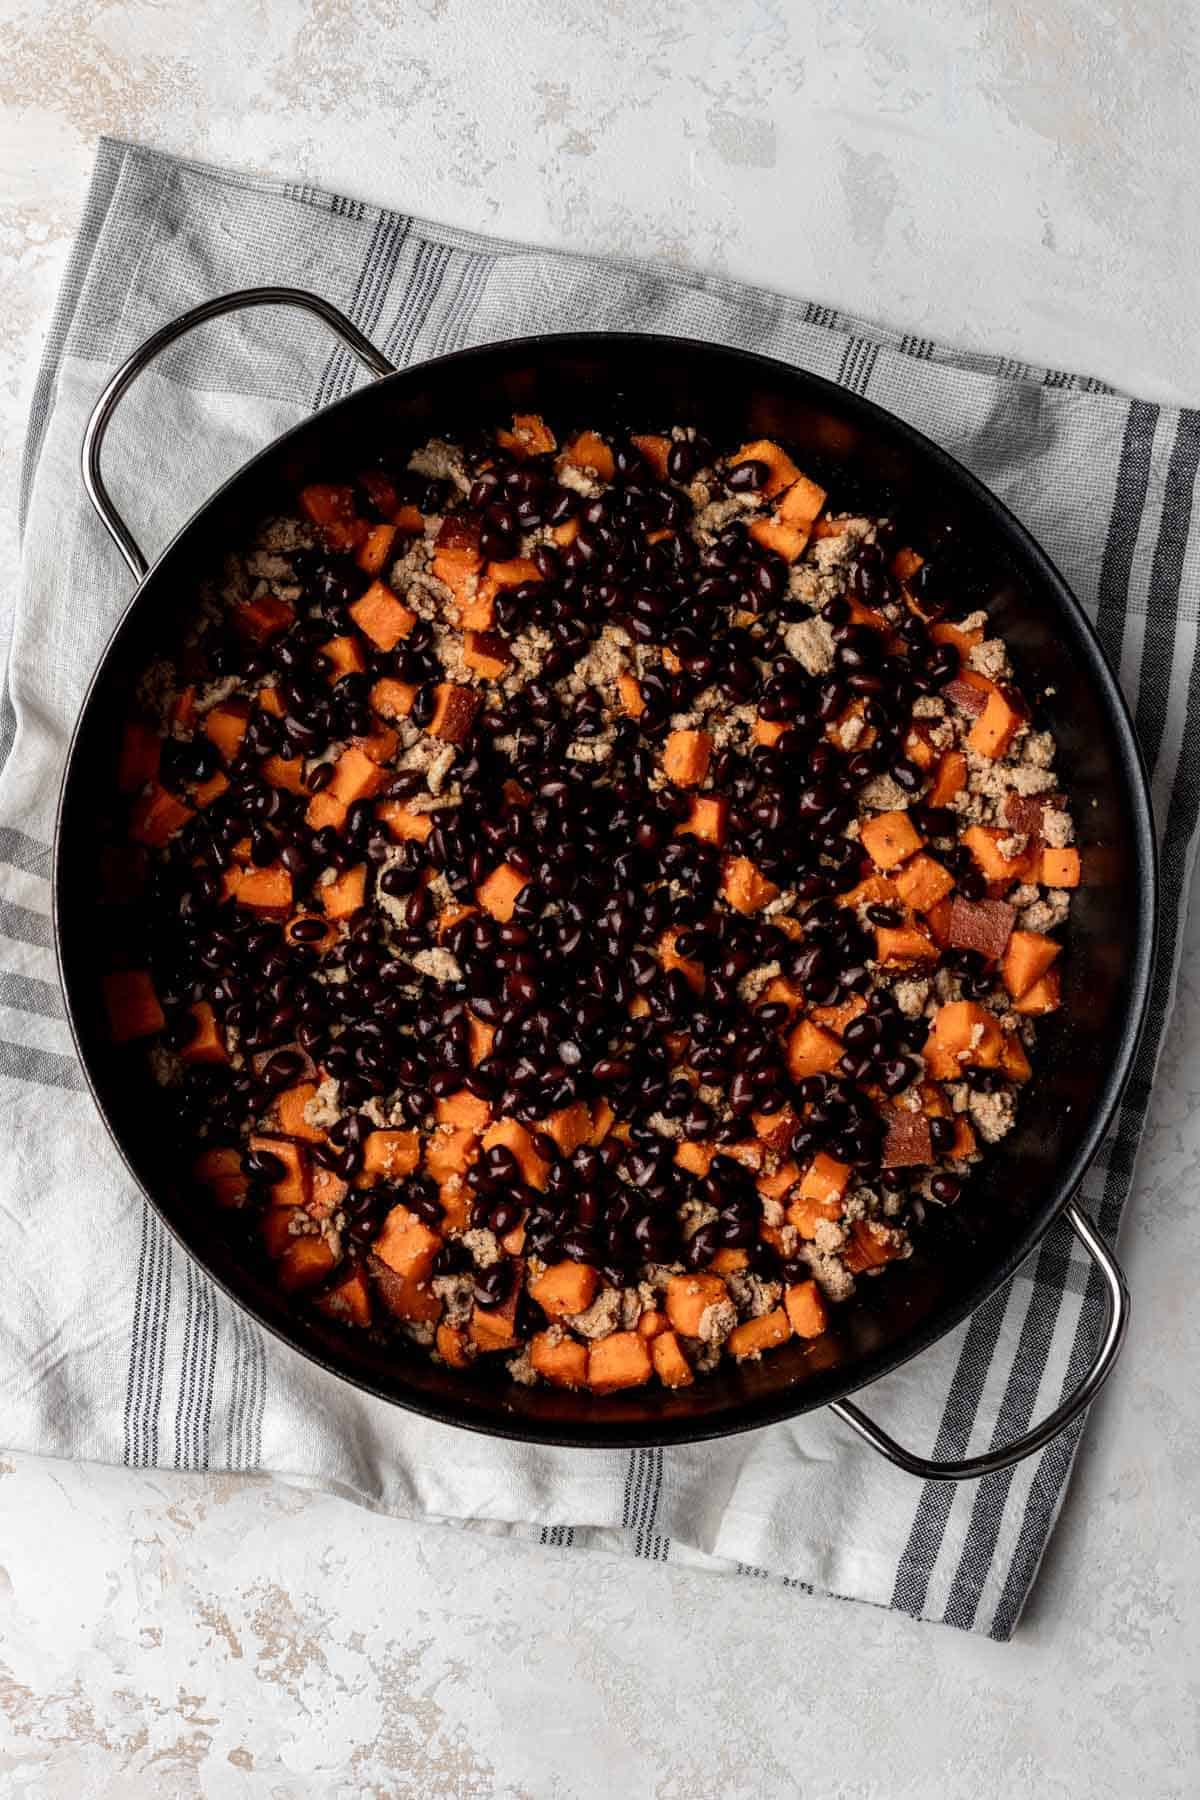 Black beans mixed with ground turkey and sweet potato in a skillet.